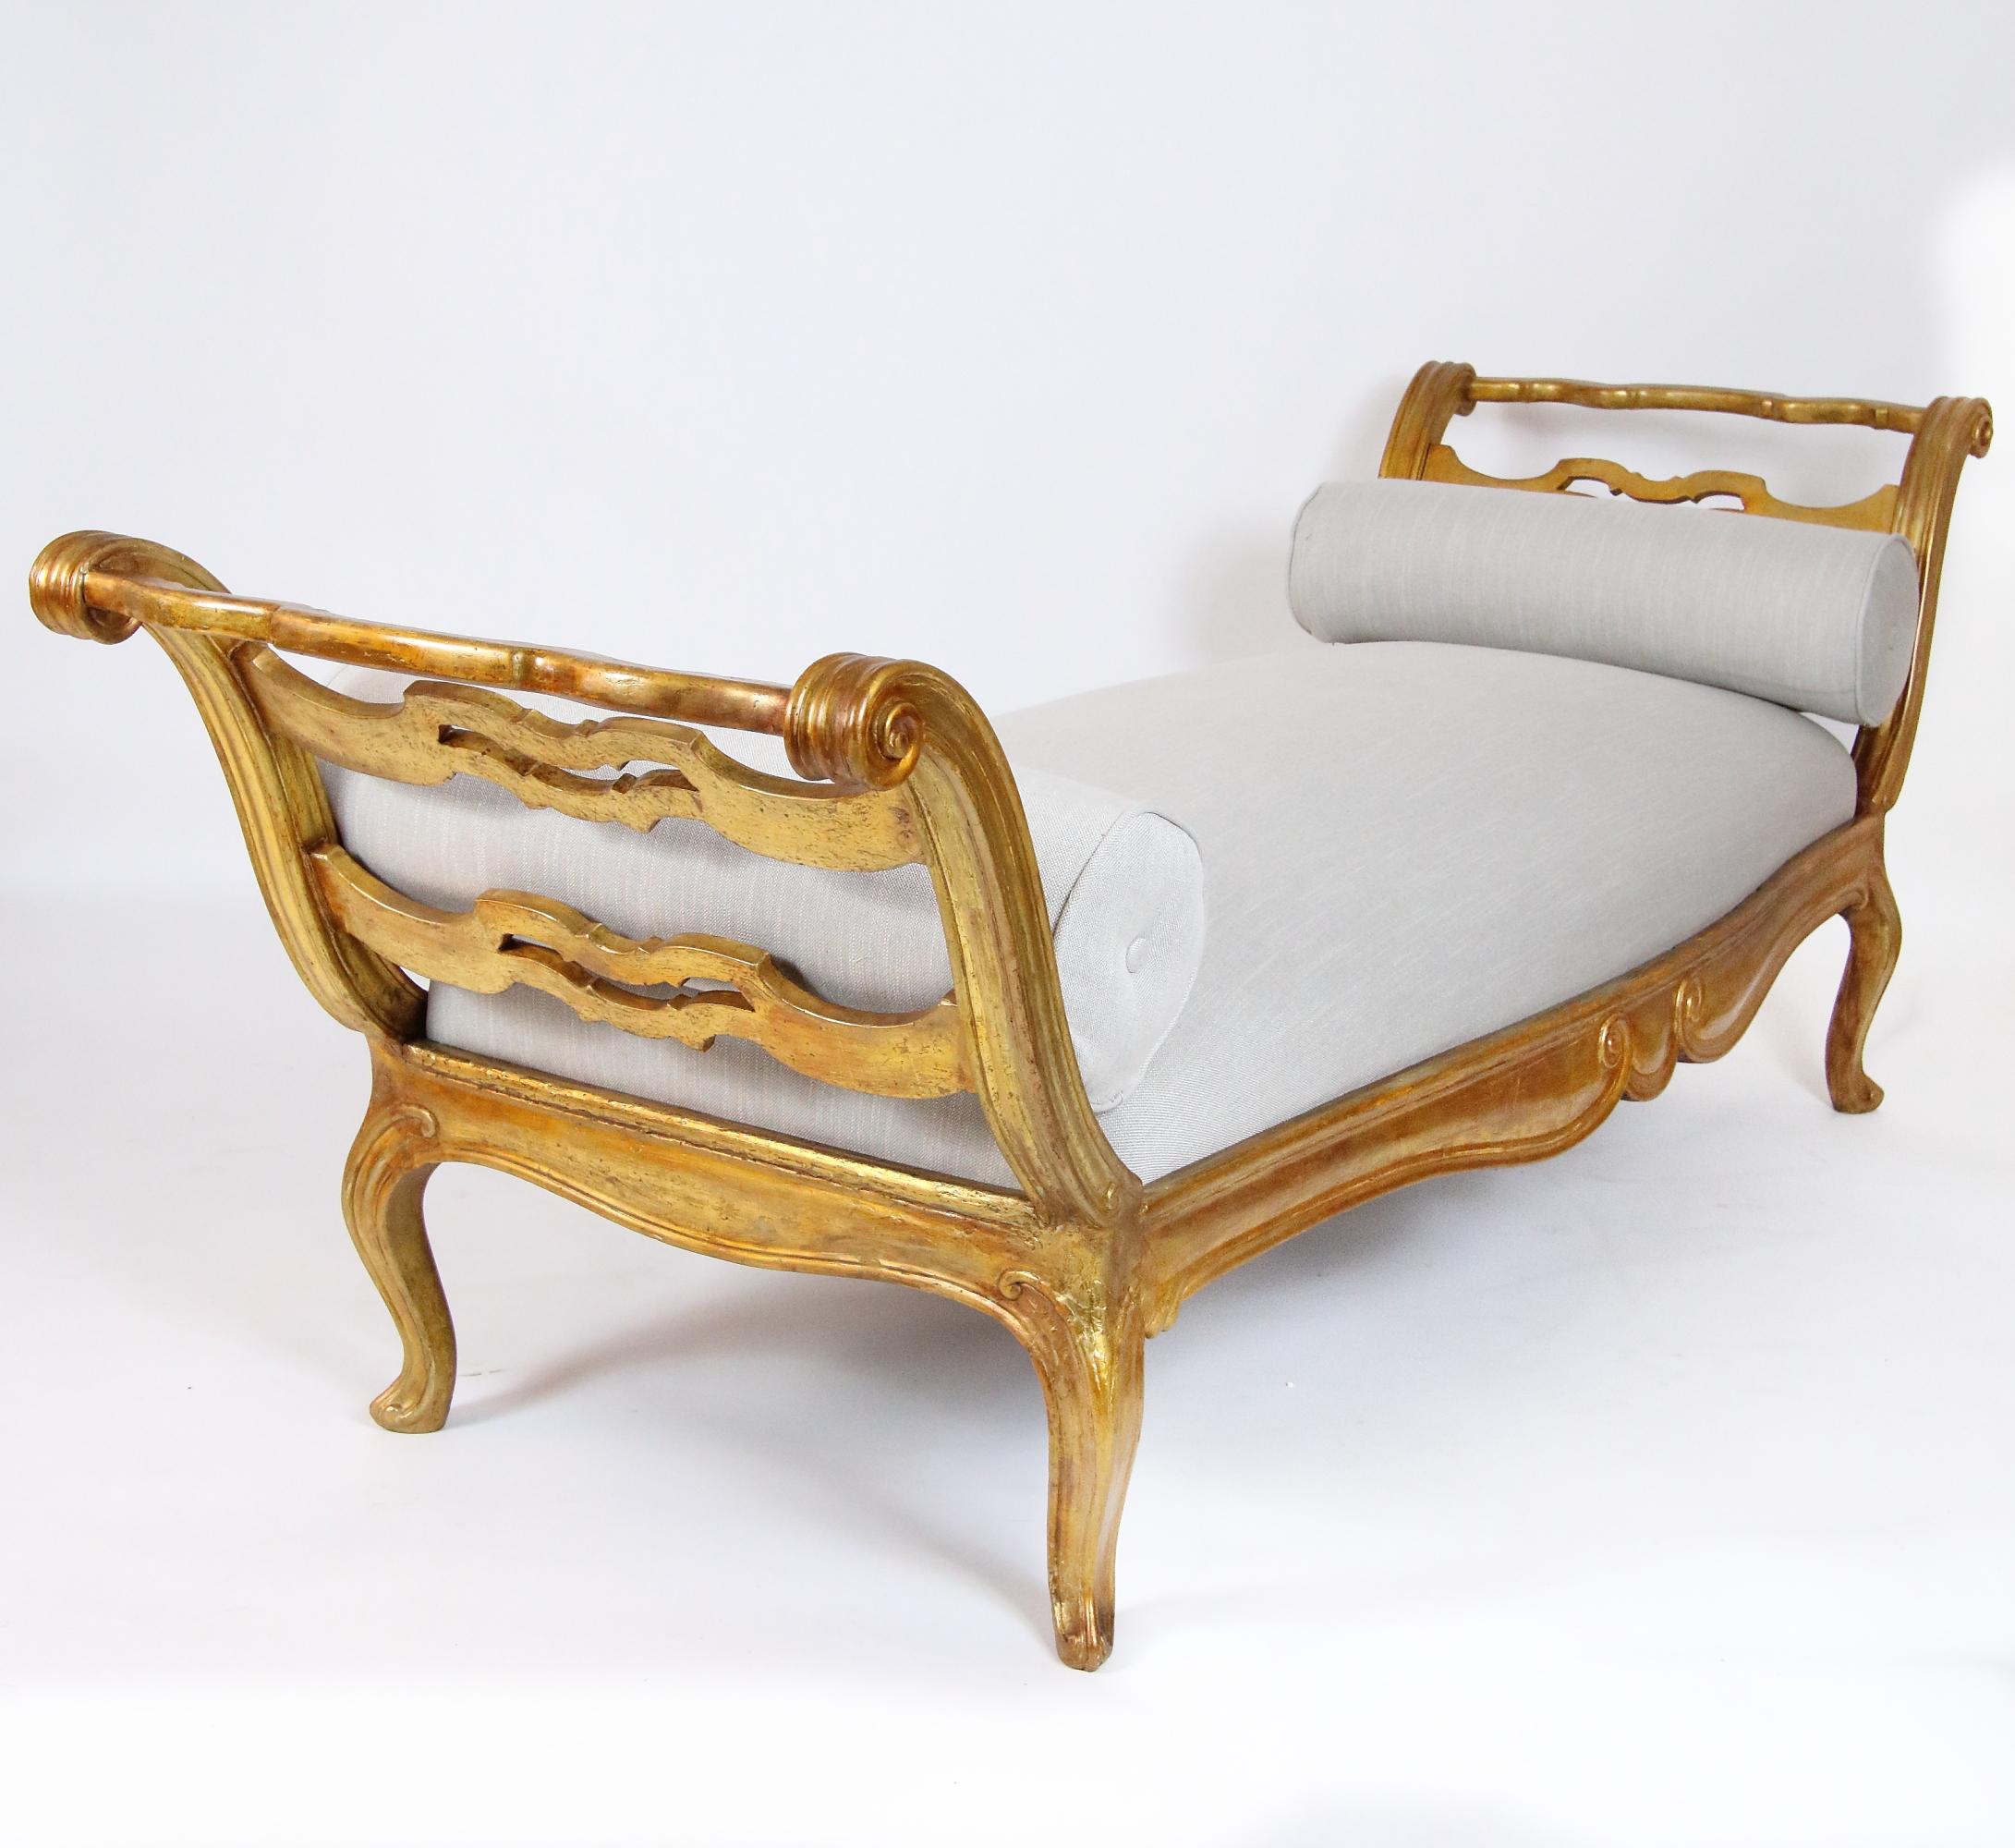 18th Century French/Provencal Louis XV Giltwood Bench or Daybed

Large Louis XV bench or day bed made of carved and gilt wood raised by four cabriole legs ending in scrolled feet. The front with a curvy frieze showing a central scroll decoration,